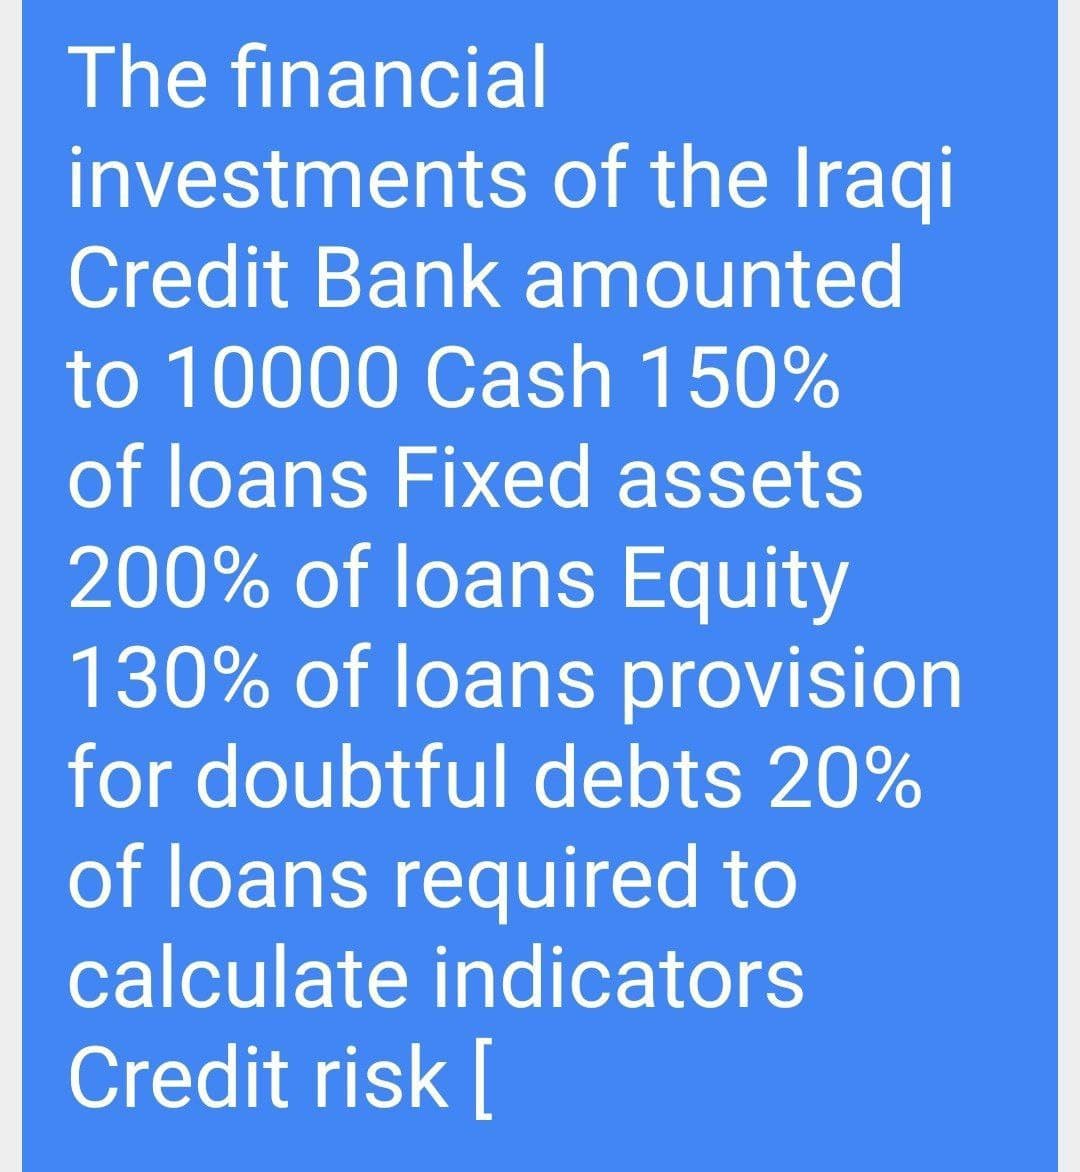 The financial
investments of the Iraqi
Credit Bank amounted
to 10000 Cash 150%
of loans Fixed assets
200% of loans Equity
130% of loans provision
for doubtful debts 20%
of loans required to
calculate indicators
Credit risk [
